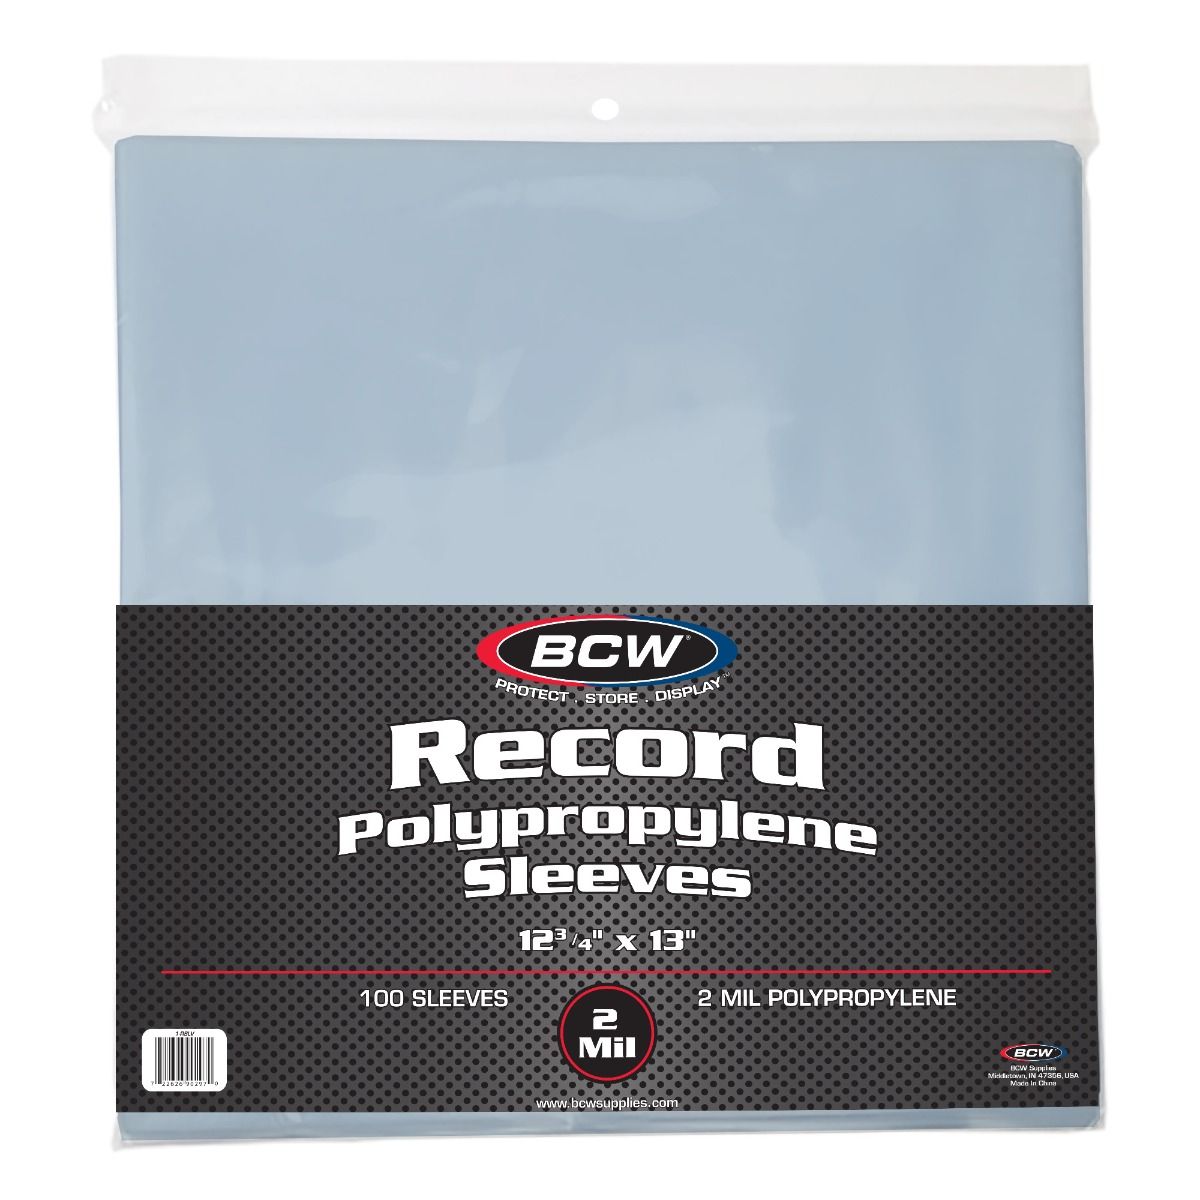 Archival Quality Sleeves Bundle - Vinyl Record Collector Inner and Outer  Sleeves for Protection and Storage